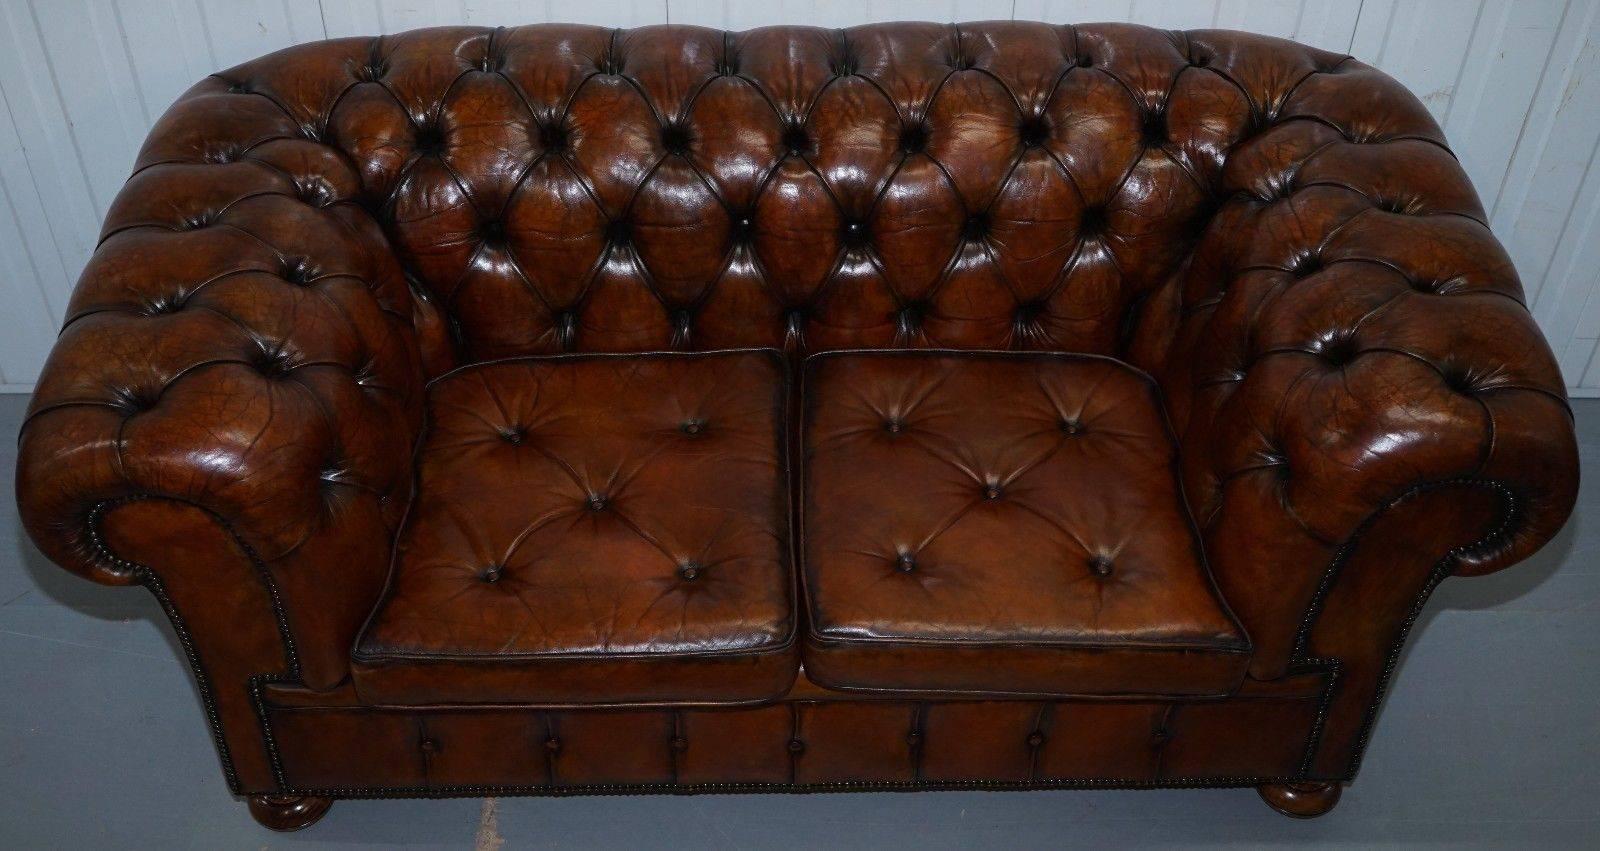 Victorian Sprung Walnut Thomas Chippendale Restored Aged Brown Leather Chesterfield Sofa